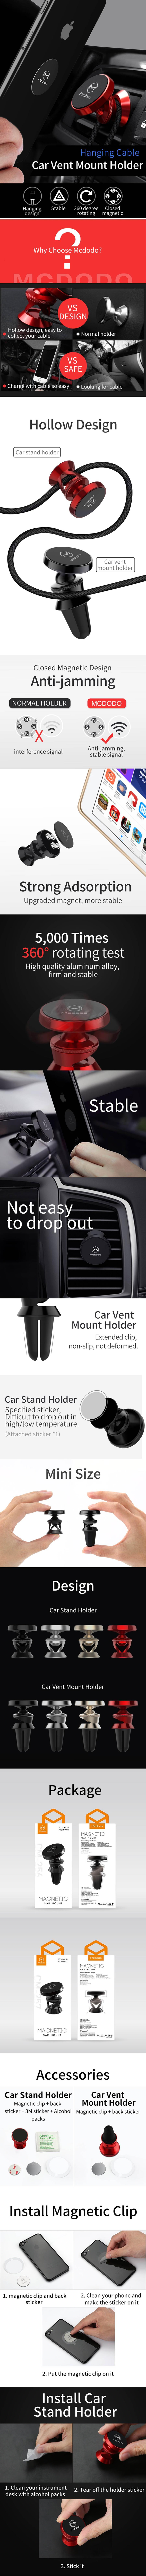 Mcdodo car holder black magnetic car air vent with cable clip CM-2561